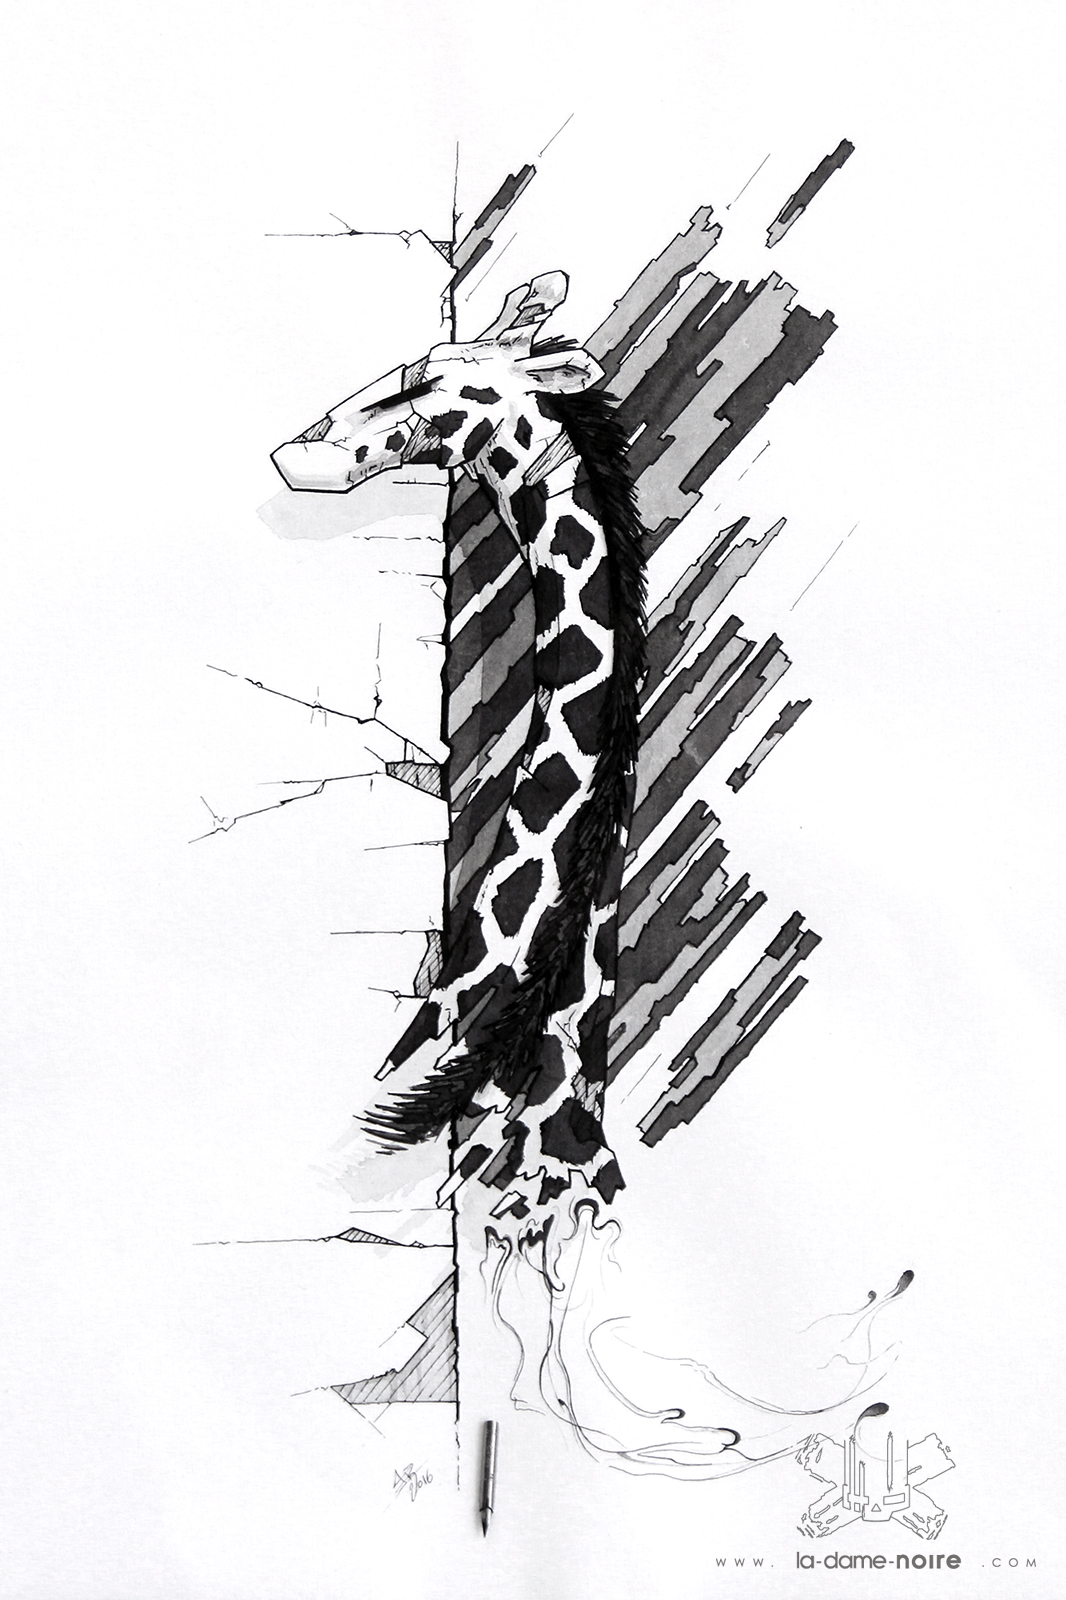 Drawing with china ink of a Giraffe